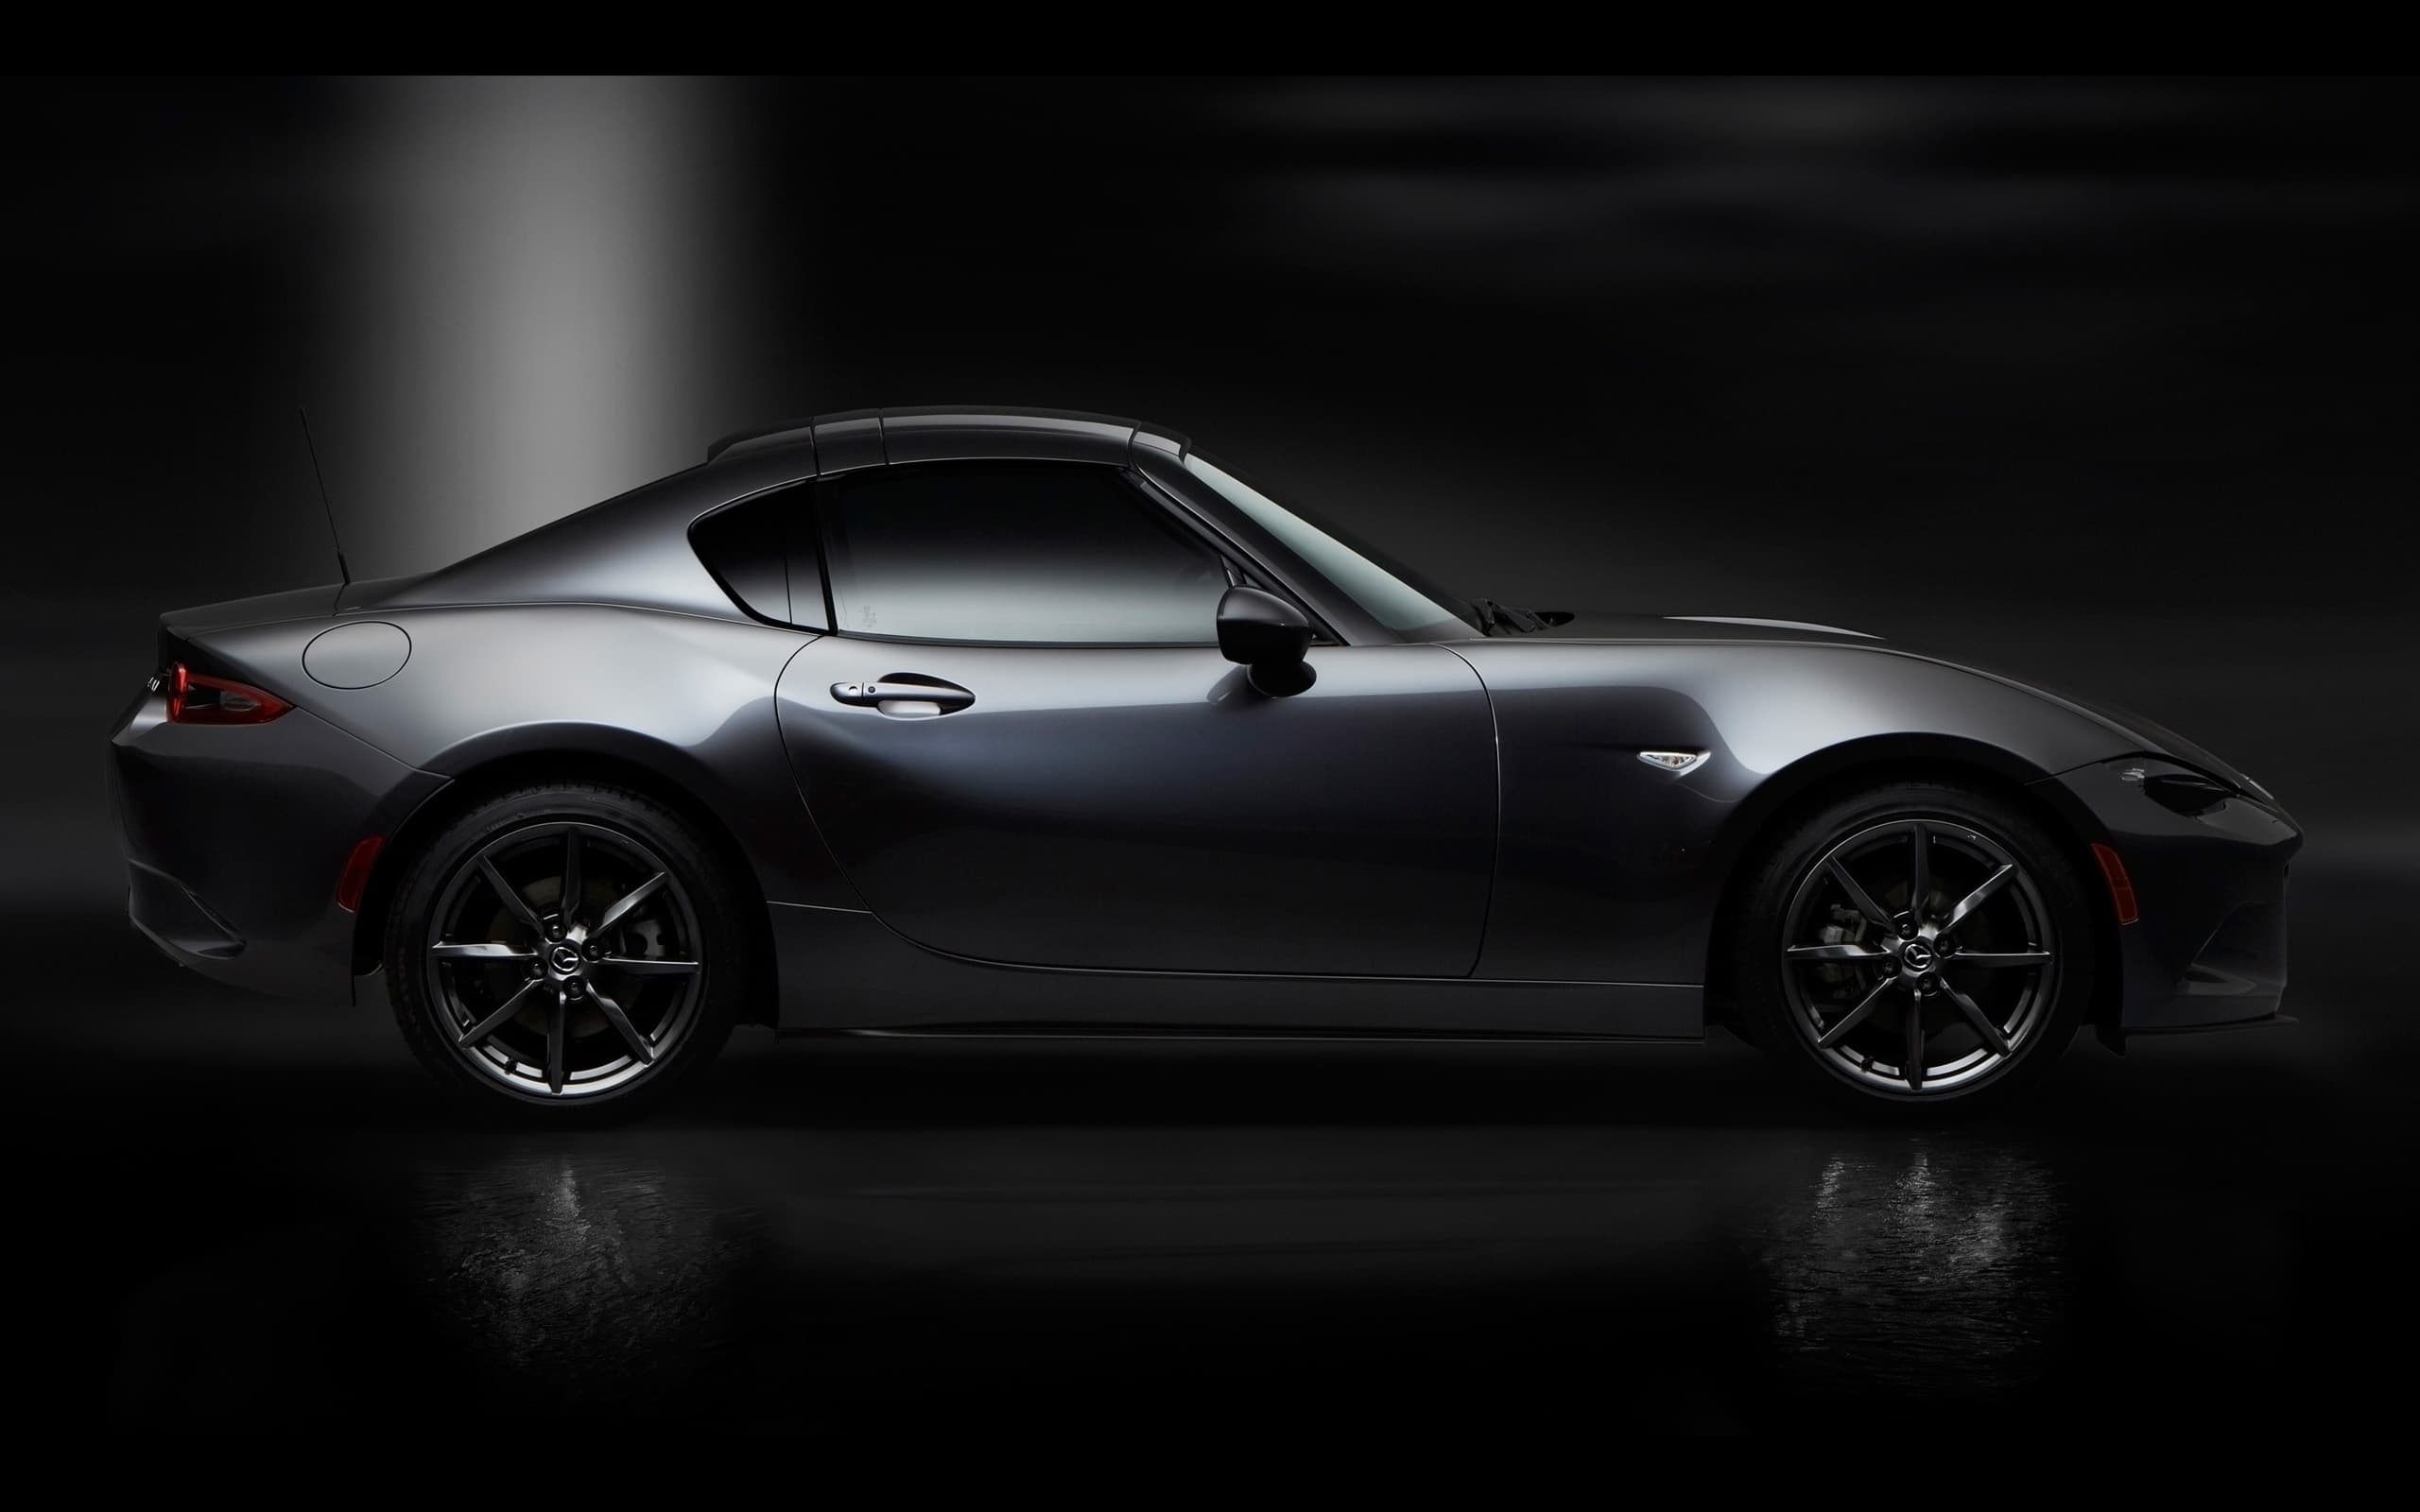 Free Download Mazda Mx 5 Rf 2017 Wallpapers Hd High Quality Images, Photos, Reviews